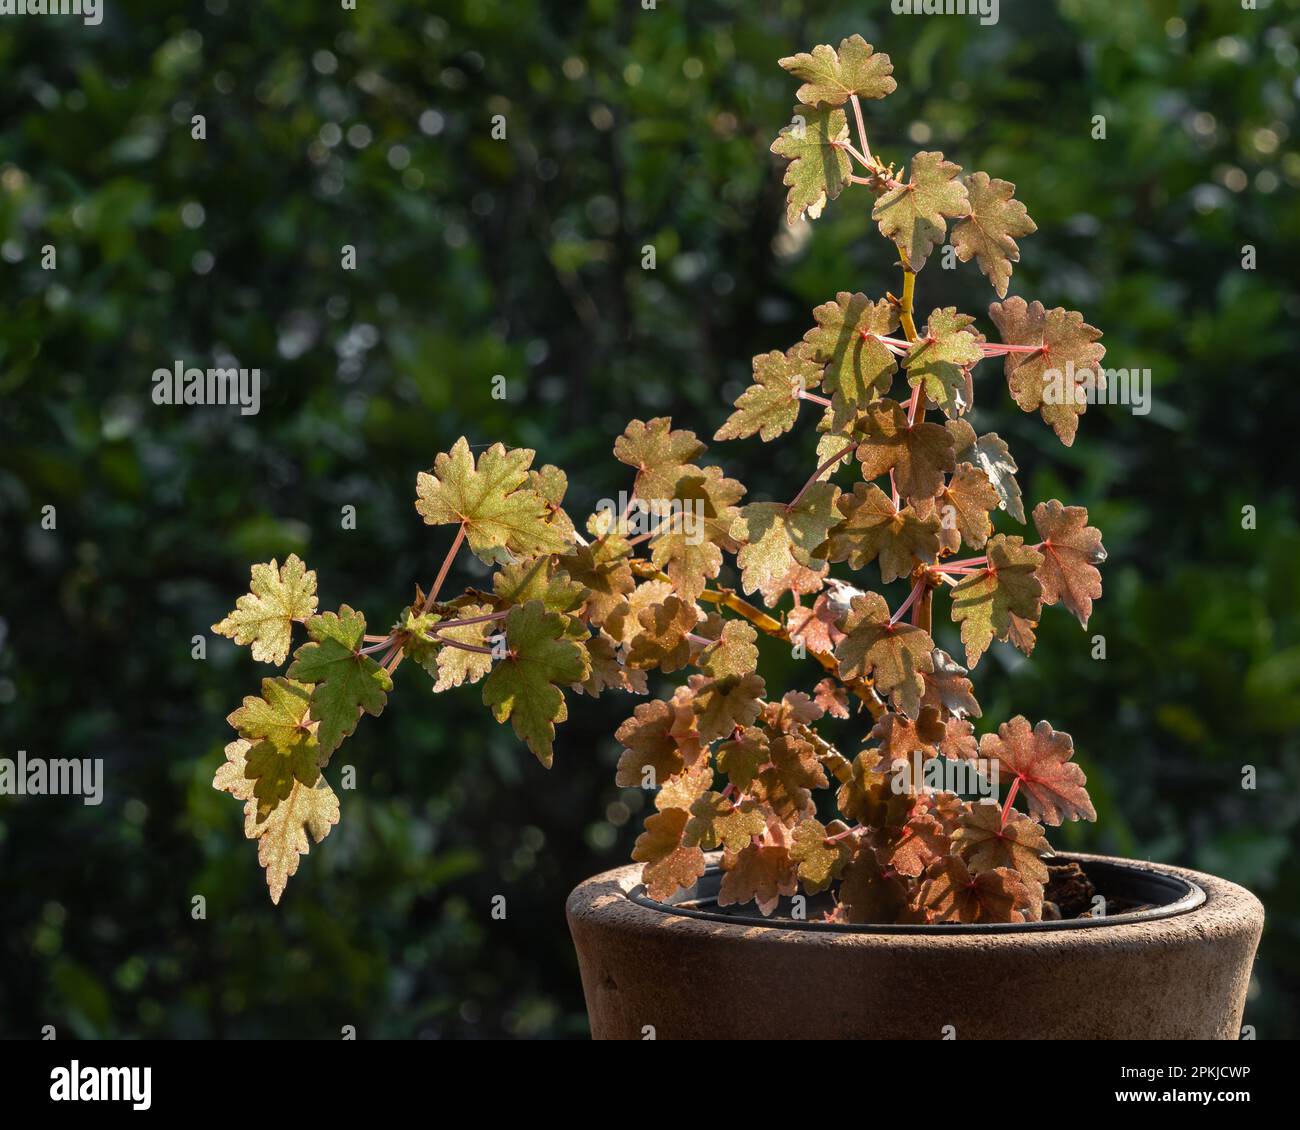 Closeup view of begonia dregei aka maple leaf or grape leaf begonia outdoors in bright light on dark natural background Stock Photo